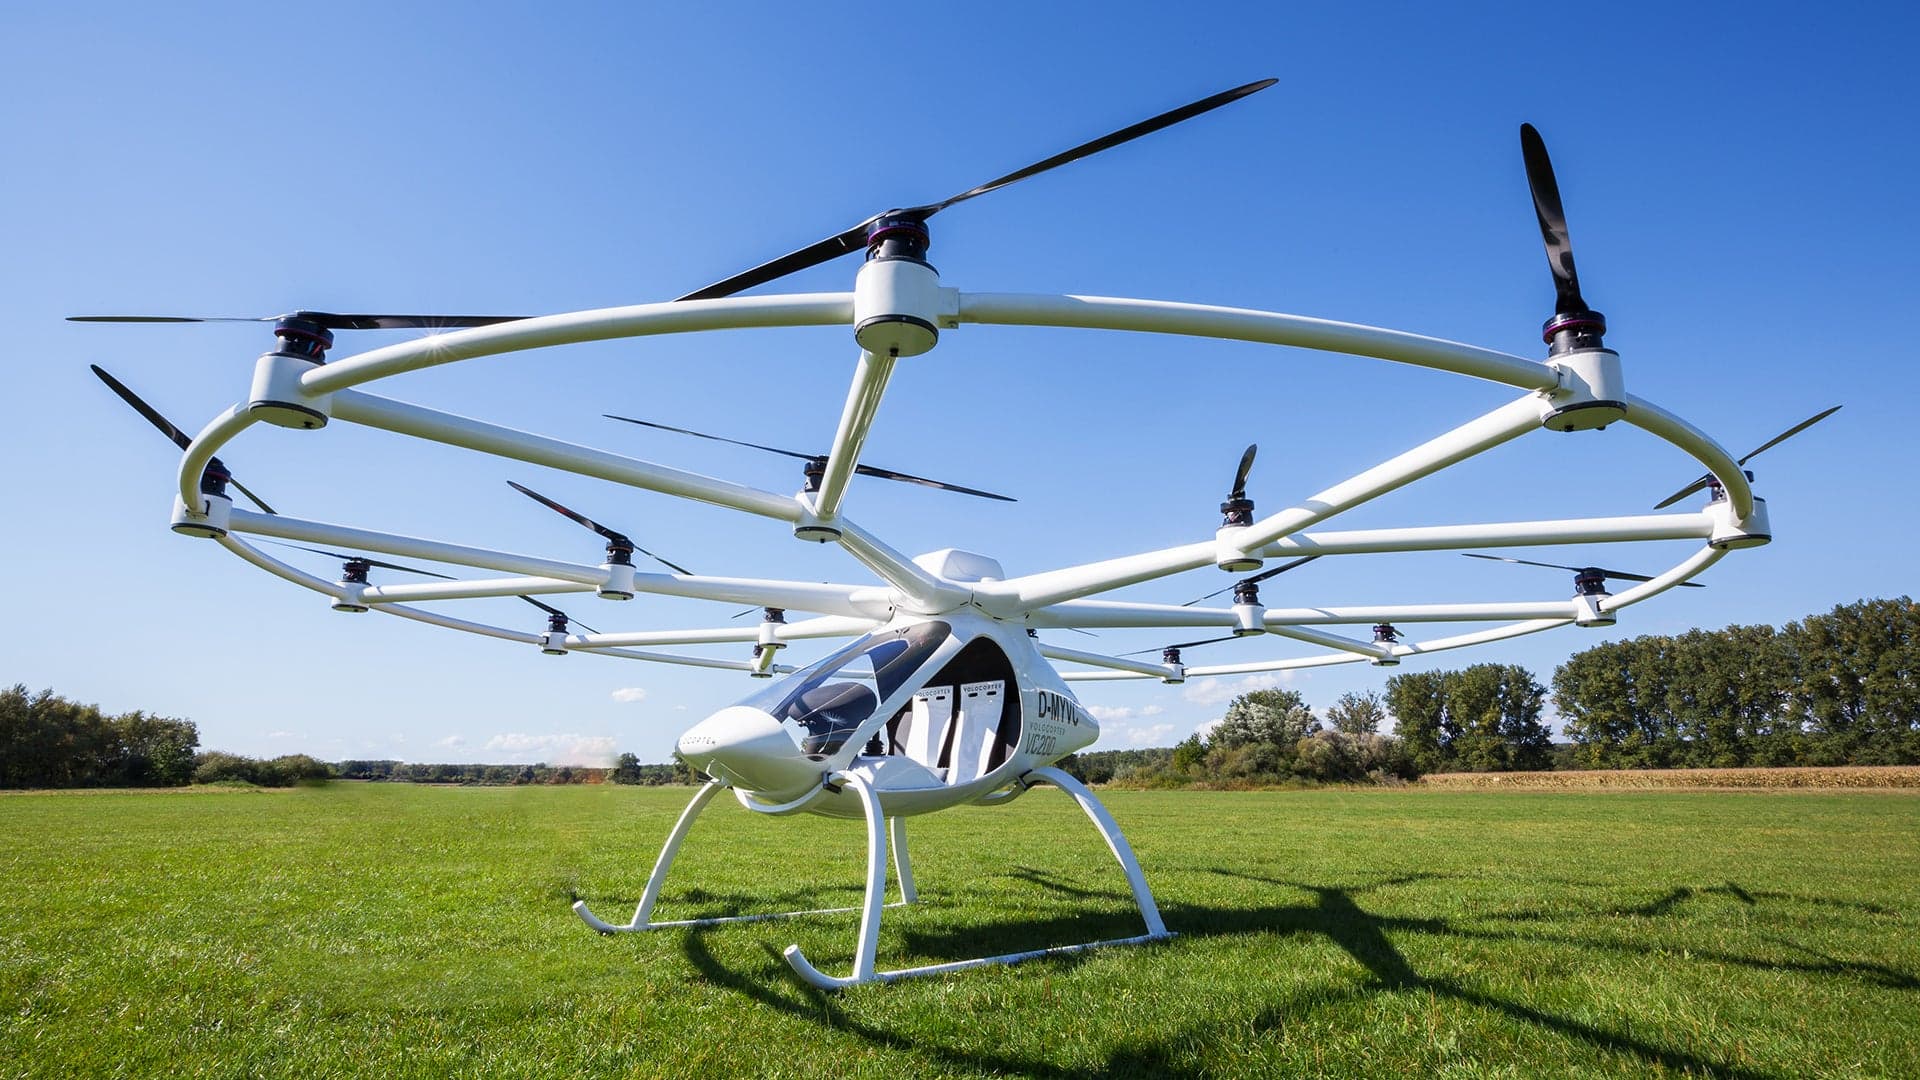 This Drone-Inspired Multicopter Could Be the Flying Car You’ve Dreamed Of